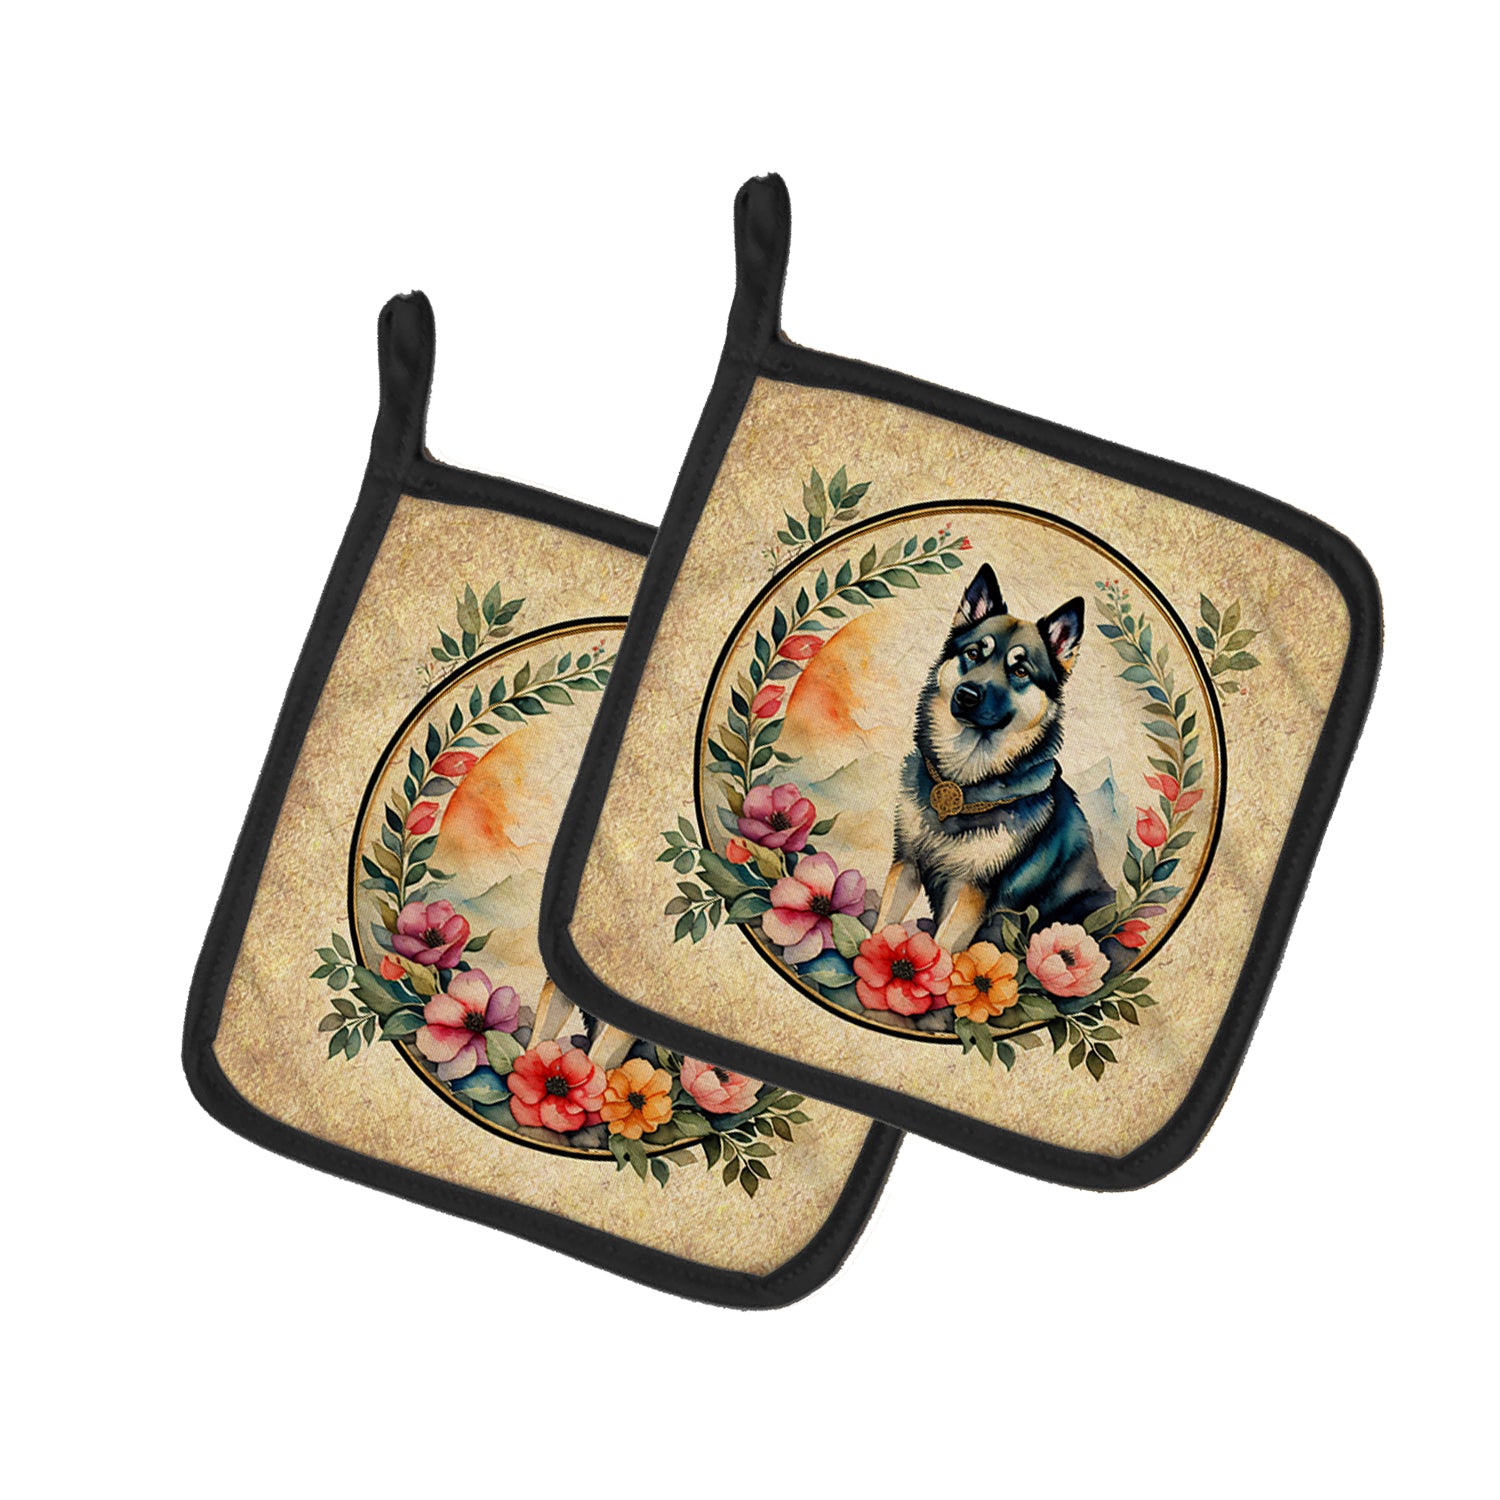 Buy this Norwegian Elkhound and Flowers Pair of Pot Holders